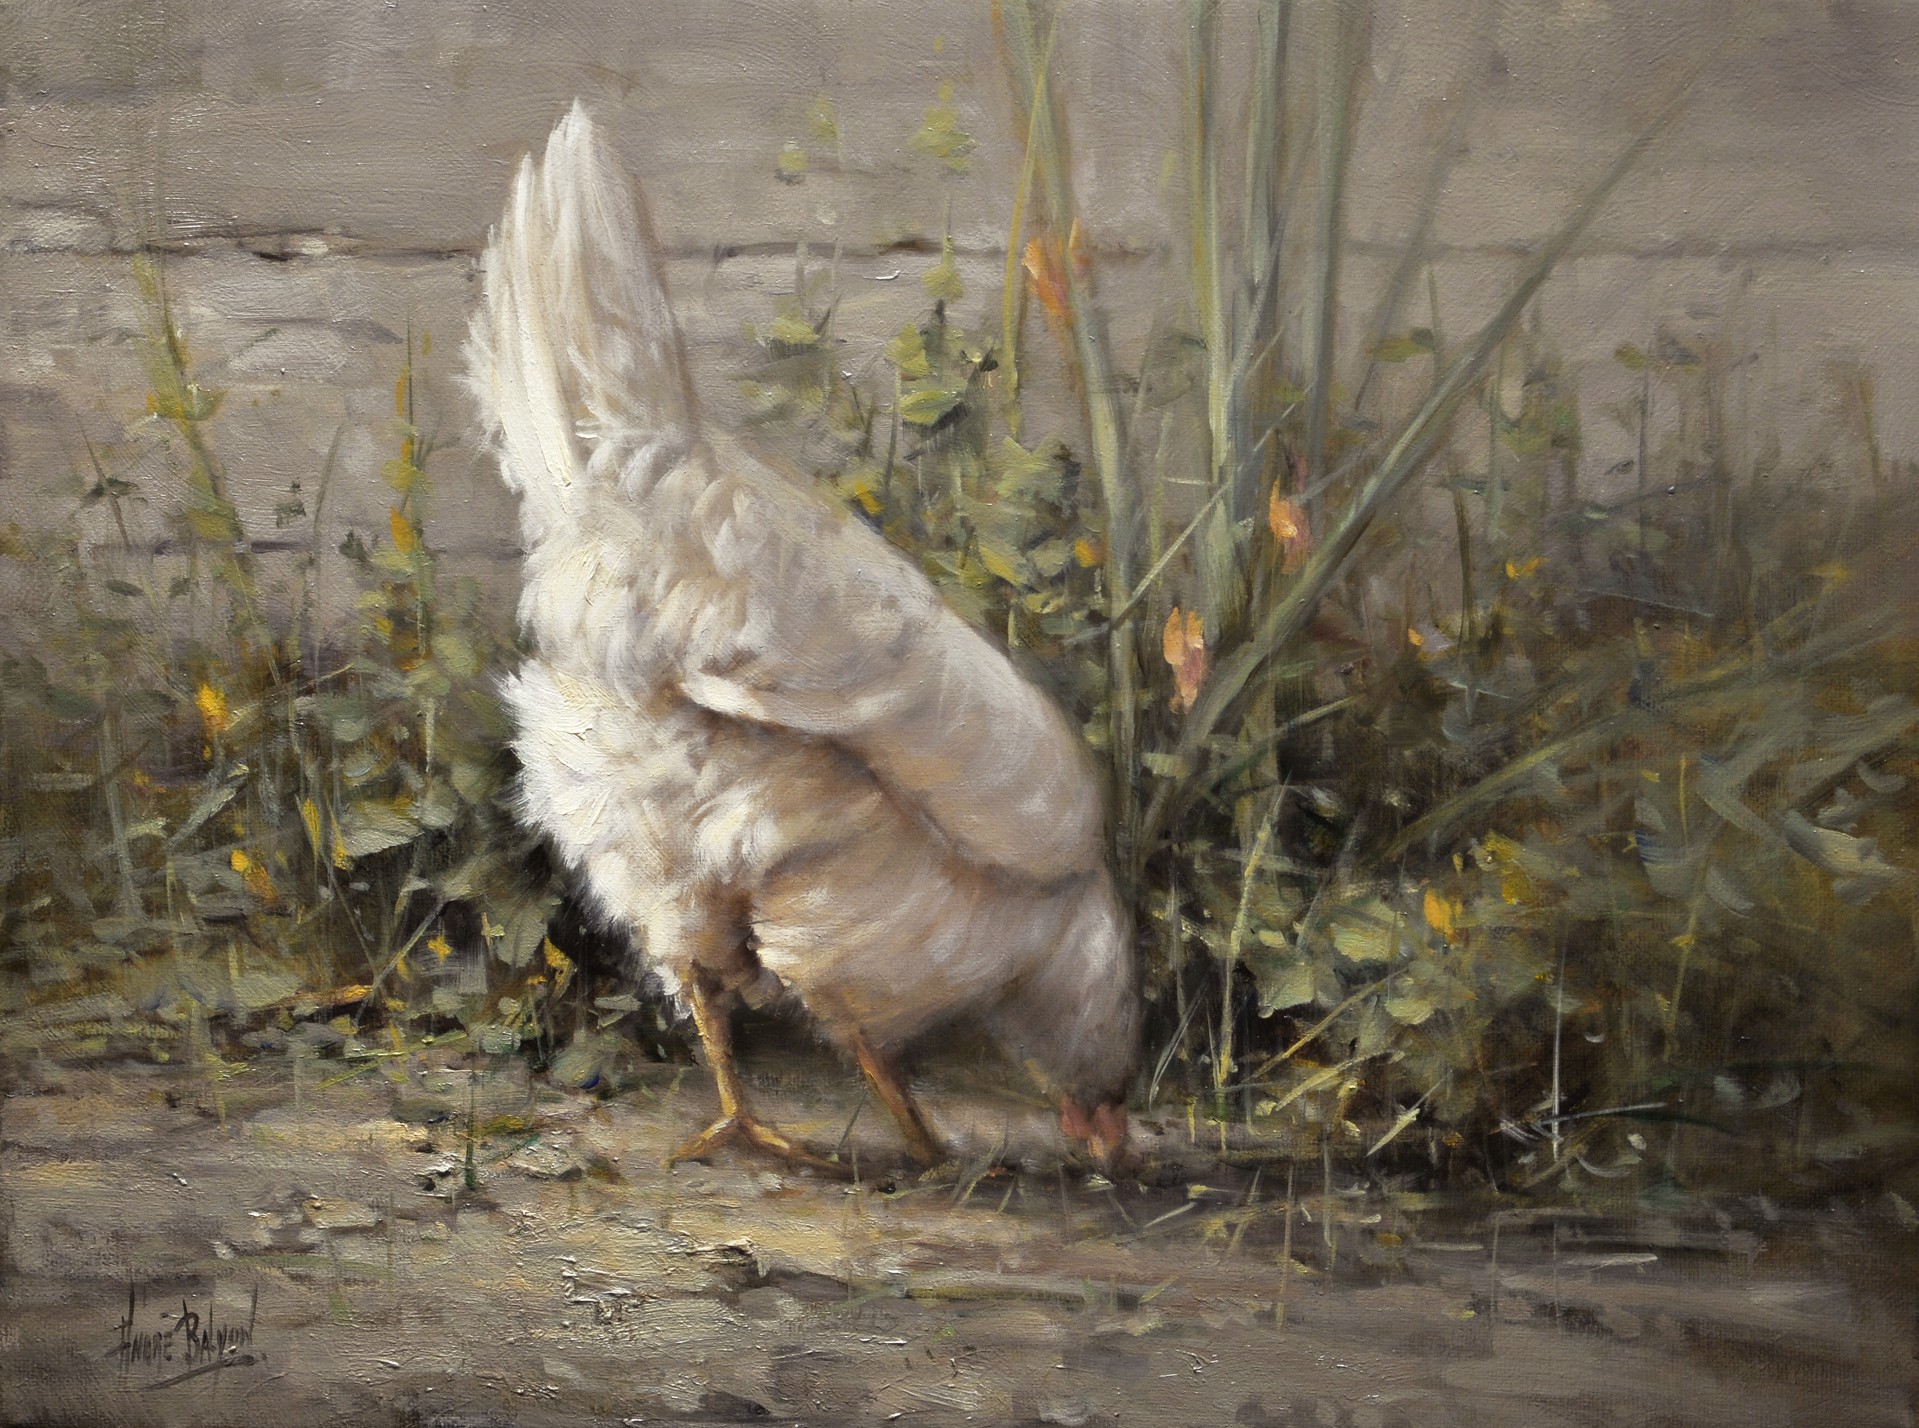 Spring Chicken by Andre Balyon